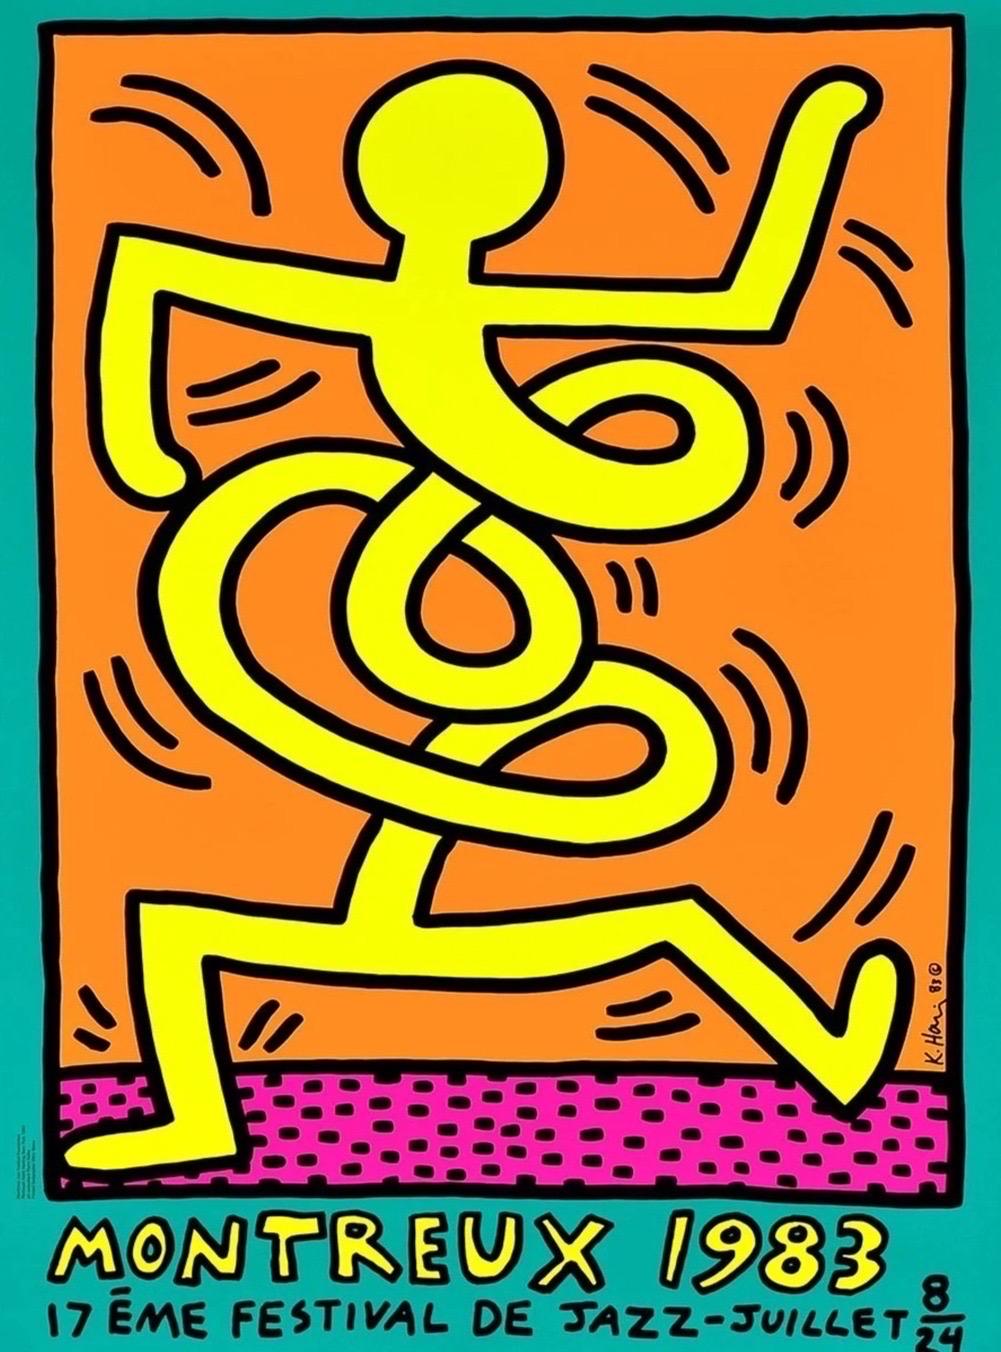 1983 Keith Haring Montreux Jazz Festival Green Original Poster

5 colour neon screenprint on heavy stock paper

Open edition, signed and dated by the artist in plate 

70 x 100 cm 

Markings: Printed by Serigraphie Uldry Bern, Switzerland, with